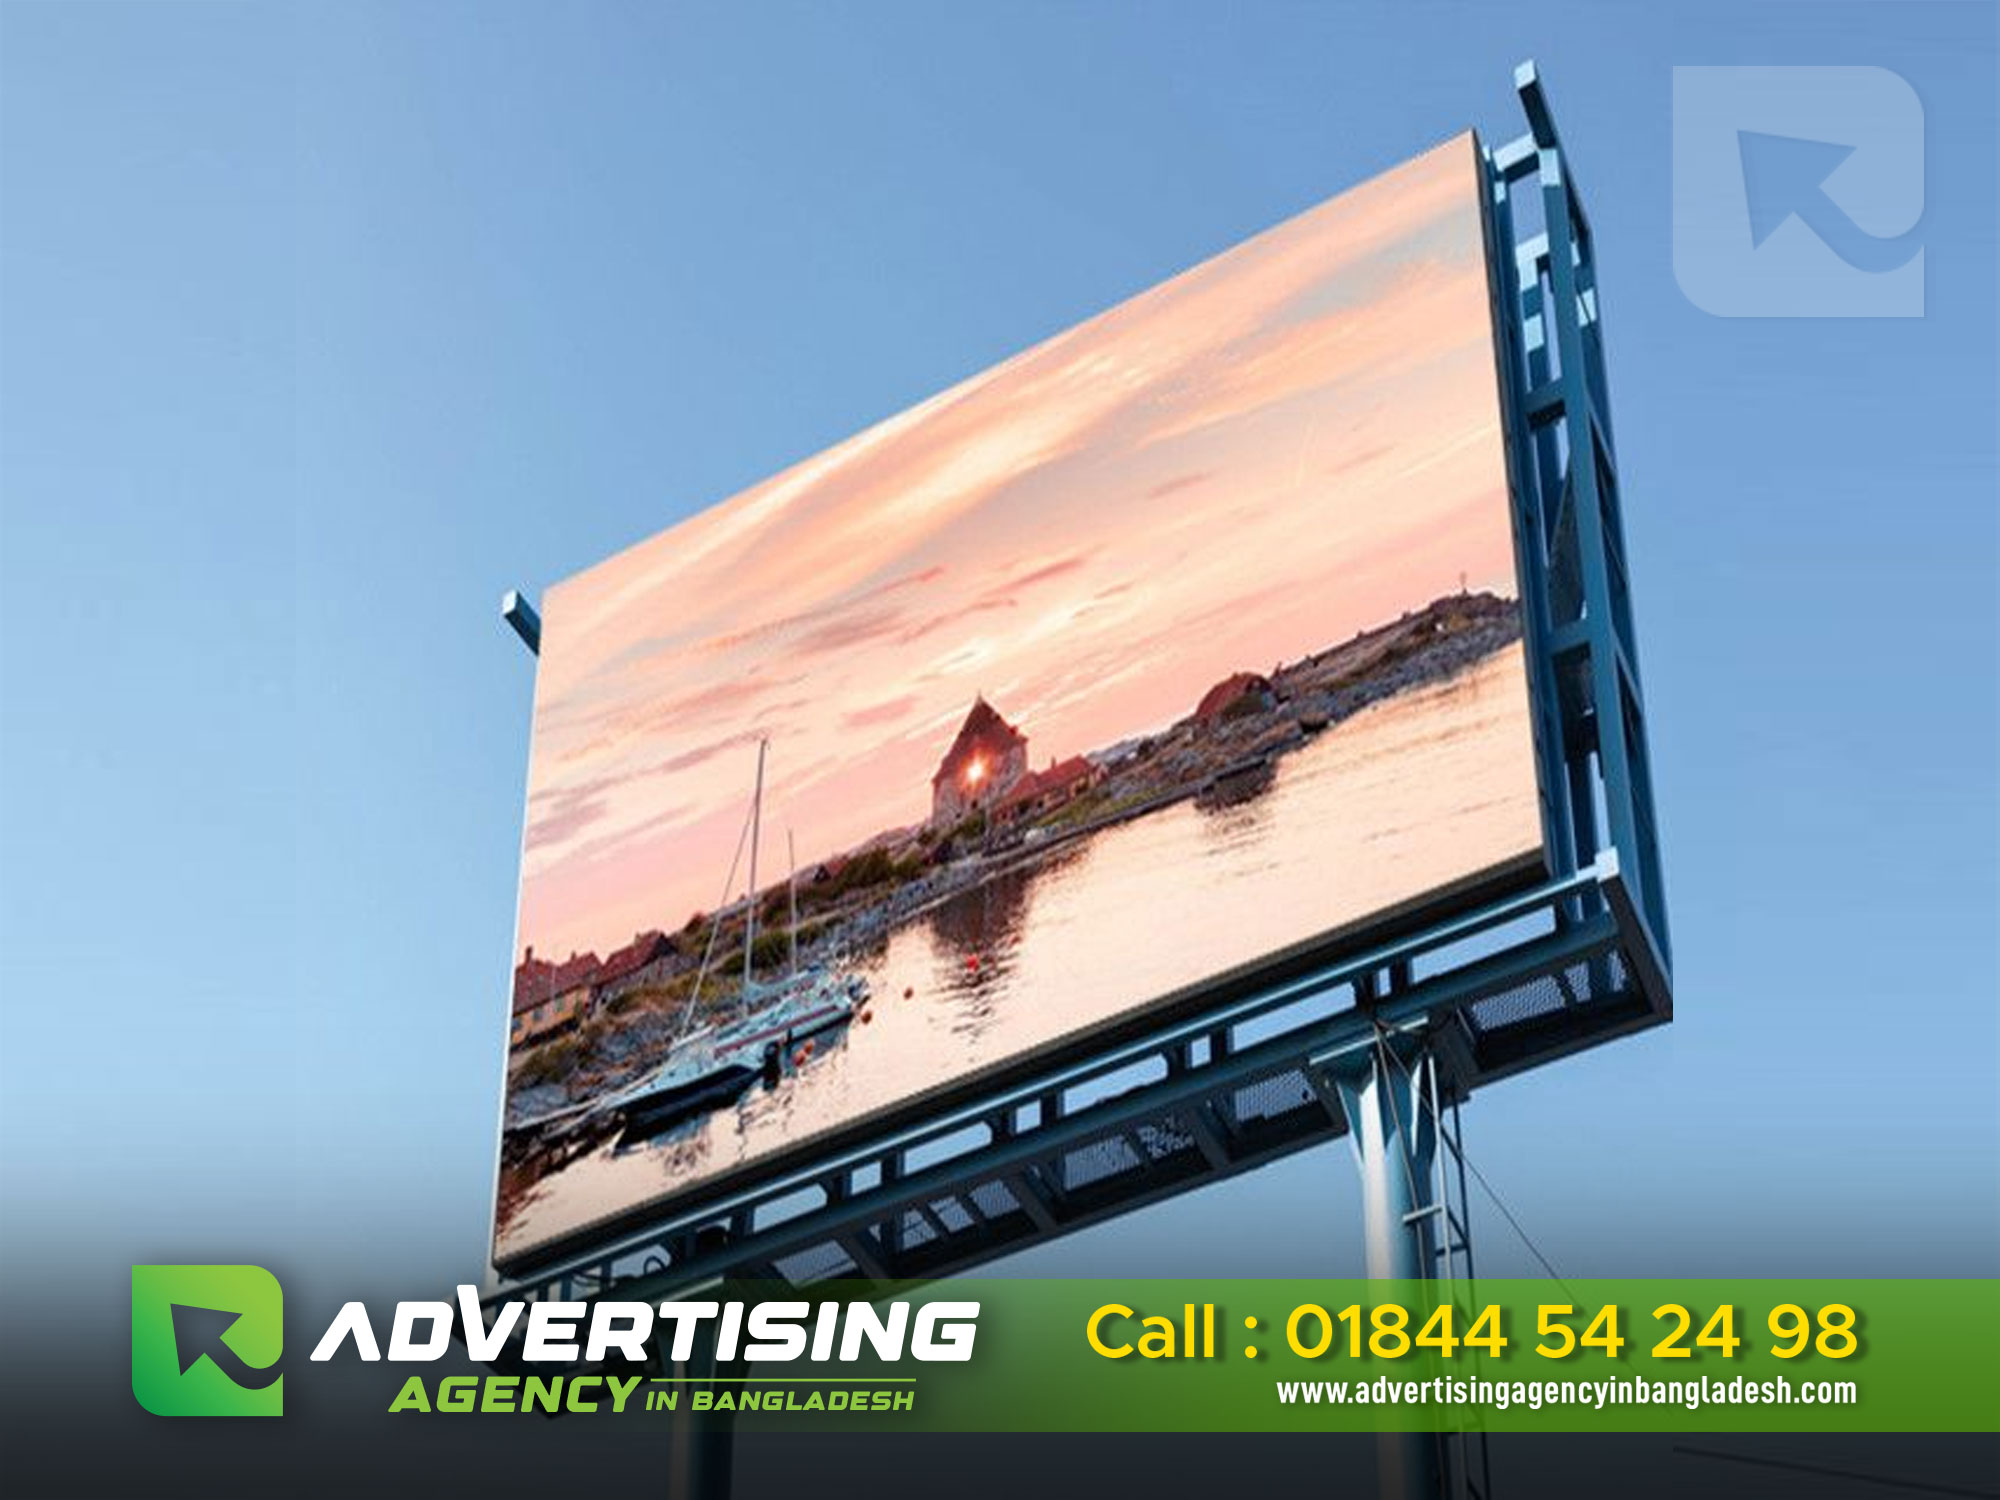 Outdoor led display screen price in Bangladesh I need SEO keywords for my website.One of the newest and most efficient ways to spread your message to a big audience is through digital billboards. They are illuminating, striking, and challenging to miss. In Bangladesh, outdoor led display panels are becoming more and more common because of their effectiveness and low cost. Led display screens can be modified and updated with the most recent information without the expense or hassle of regular billboard updates. As they use less electricity and require less maintenance over time, they are also more economical.page on Facebook. Outdoor led display screen price in Bangladesh Outdoor led display screen price in Bangladesh Price of an LED display screen in Bangladesh. A flat panel display known as an LED display uses a number of light-emitting diodes as its video display’s pixels. They can be used outside where they are visible in the sun because of their brightness. Early LED displays were utilized as scoreboards and other signs and boards. As prices have declined and the technology has evolved, LED display displays have grown in popularity in recent years. Due to their low cost and high quality, LED display panels are growing in popularity in Bangladesh. Outdoor LED Display Screen Price There are many factors that affect the price of an LED display screen. The most important factor is the size of the screen. The bigger the screen, the more expensive it will be. Another important factor is the resolution of the screen. The higher the resolution, the more expensive the screen will be. The last factor is the type of LED used. The most common type is the SMD LED, which is the most expensive. The LED display screen price in Bangladesh varies depending on the size, resolution and type of LED used. The price also varies depending on the brand. The most popular brands are Samsung, LG and Sony. The average price of an LED display screen in Bangladesh is about ৳5,000. Best LED Screen in Advertising Agency in Bangladesh Are you looking for an outdoor LED display screen price in Bangladesh? If so, you have come to the right place. In this article, we will take a look at the prices of outdoor LED display screens in Bangladesh. Outdoor LED display screens are becoming increasingly popular in Bangladesh. They are used in a variety of locations, including shopping malls, airports, and office buildings. Outdoor LED display screens offer a number of advantages over traditional displays, including higher brightness, lower power consumption, and longer lifespan. The price of an outdoor LED display screen depends on a number of factors, including the size of the screen, the resolution, the brightness, and the warranty. The price of an outdoor LED display screen can range from a few hundred dollars to several thousand dollars. If you are looking for an outdoor LED display screen for your business or office, you should consider the different factors that will affect the price. If you need a high-quality display screen that will last for many years, you should be prepared to pay a higher price. On the other hand, if you are only looking for a display screen for a temporary event or a short-term project, you can find a lower-priced option. Outdoor LED Displays The Brightest Way to advertise When you are comparing the prices of outdoor LED display screens, you should also consider the quality of the product. There are many different manufacturers of outdoor LED display screens, and some offer better quality than others. In general, you should expect to pay more for a screen from a well-known and reputable manufacturer. Finally, you should also consider the warranty when you are comparing the prices of outdoor LED display screens. Some manufacturers offer a longer warranty than others. A longer warranty gives you more peace of mind, knowing that you are covered if something goes wrong with your screen. When you are looking for an outdoor LED display screen price in Bangladesh, keep all of these factors in mind. By considering the different factors that will affect the price, you can be sure to find the best possible deal. “How to Choose an Outdoor LED Display Screen” There are many factors to consider when purchasing an outdoor LED display screen, such as price, size, and features. However, one of the most important factors to consider is where to buy the screen. There are many different places to buy outdoor LED display screens in Bangladesh, such as online, in store, or through a retailer. One of the most popular places to buy outdoor LED display screens in Bangladesh is online. This is because online retailers typically have a wide selection of screens to choose from, as well as competitive prices. In addition, online retailers often offer free shipping and returns, which can save you time and money. However, it is important to do your research before buying from an online retailer, as some may not be reputable or may not offer a good return policy. Another option for where to buy outdoor LED display screens in Bangladesh is in store. This can be a good option if you want to see the product in person before purchasing it. In addition, you can usually negotiate a lower price with the store, as they will want to make a sale. However, it is important to note that not all stores will have the same selection of screens, so you may need to visit multiple stores before finding the perfect screen for you. LED Displays The Best Way to Brighten Up Your Outdoor Space The last option for where to buy outdoor LED display screens in Bangladesh is through a retailer. This can be a good option if you know what type of screen you want but do not want to purchase it online or in store. Retailers typically have a wide selection of screens and offer competitive prices. However, it is important to remember that you will likely have to pay for shipping and handling when purchasing from a retailer. No matter where you decide to purchase your outdoor LED display screen, it is important to do your research and compare prices before making a final decision. By taking the time to do this, you can be sure that you are getting the best possible deal on your new screen. The Top Ten Reasons to Use an Outdoor LED Display Screen Get Best Outdoor LED Display Screen Price in Bangladesh. Are you looking for an outdoor LED display screen price in Bangladesh? If so, you have come to the right place. Here at Laptop Outlet, we have a wide variety of outdoor LED screens at different price points to suit your budget. When it comes to outdoor LED display screens, there are a few things to consider before making your purchase. The first thing to think about is the size of the screen. Outdoor LED screens come in a variety of sizes, so it is important to choose one that will fit well in the space you have available. Another important factor to consider is the resolution of the screen. Again, outdoor LED screens come in a variety of resolutions. If you are going to be displaying high-resolution images or videos, then you will need to make sure that the screen you choose has a high enough resolution to display these properly. Choose the Perfect Outdoor LED Display Screen for Your Business The third thing to think about when choosing an outdoor LED screen is the brightness. Outdoor screens are exposed to the elements, so they need to be able to withstand direct sunlight. If you are in an area that gets a lot of sunlight, then you will need to make sure that the screen you choose is rated for high levels of brightness. Once you have considered these factors, you can then start looking at outdoor LED display screens in Bangladesh. At Laptop Outlet, we have a wide variety of screens to choose from. We have screens ranging in size from 22 inches all the way up to 65 inches. We also have a wide variety of resolutions to choose from. If you need a high-resolution screen for displaying images or videos, then we have screens with resolutions up to 4K. When it comes to brightness, our outdoor LED screens are some of the brightest on the market. If you are in an area that gets a lot of direct sunlight, then you will need a screen that is rated for high levels of brightness. Our screens are rated for up to 6,000 nits of brightness, so they will be able to withstand even the brightest conditions. Once you have considered all of these factors, you can then start looking at outdoor LED display screens in Bangladesh. At Laptop Outlet, we have a wide variety of screens to choose from. We have screens ranging in size from 22 inches all the way up to 65 inches. We also have a wide variety of resolutions to choose from. If you need a high-resolution screen for displaying images or videos, then we have screens with resolutions up to 4K. LED Displays The Future of Outdoor Advertising When it comes to brightness, our outdoor LED screens are some of the brightest on the market. If you are in an area that gets a lot of direct sunlight, then you will need a screen that is rated for high levels of brightness. Our screens are rated for up to 6,000 nits of brightness, so they will be able to withstand even the brightest conditions. Once you have considered all of these factors, you We can conclude that the outdoor led display screen price in Bangladesh is quite reasonable and affordable for the people of Bangladesh. the cost of an outdoor led display screen in Bangladesh. Price Of Outdoor Led Display Screen. Led screen panels for outdoor use. Waterproof outdoor led screen. Led display board outside. Price for a large outdoor led screen. Outdoor Lg Display. Price of an outdoor display screen. Samsung LED Outdoor Display. Software for led sign boards. Price For Outdoor Led Display Screen In Bangladesh. Moving LED Sign Board. Bangladesh Led Sign Board. Led Screen Outdoor Signboard. Led Sign Board BD. Price Of A Led Sign Board In Bangladesh. outdoor display sign with leds. Price Of Outdoor Led Screen. Details of outdoor led screens. Ideas for led sign boards. Price Of Outdoor Led Screen In India. LED Signboard Screen. LED Signboard Display. outdoor display sign with leds. Price Of Outdoor Led Screen. Led Screen Advertising. Price Of A Led Screen Billboard. Best LED Displays The Future of Outdoor Advertising Details of outdoor led screens. Ideas for led sign boards. Led Display Billboard. Displays with LEDs. Price Of Outdoor Led Screen In India. For Sale: Led Screen Billboard Truck. Led Screen Wall Billboards. LED Signage Screen Stand. Price For Led Signage. Specifications For A Led Sign Board Led TV sign board with display. Led Sign Board Price Display. Price Of A Led Sign Board. Description of a led sign board. Price Of A Led Light Sign Board. Price Of A Led Display Sign Board In Bangladesh. Price For Led Signage Board. Led display board outside. Digital display board outside. Outdoor Sign Board LED Display. Outdoor display screens for advertising. Led display signs for outdoors. Digital Signage Displays Outdoor. For Sale Outdoor Led Video Wall. Led scrolling display outside. Displays for outdoor led signage. signs with outdoor video displays. For sale is a used outdoor LED display LEDScreen #ledscreens #ledscreenrental #ledsign #ledsign #ledsigns #ledsignage #ledsignages #ledsignboard #ledsignboards #ledsigndesign #ledsignsanddesign #ledsignagesolution #ledsignagemurah #ledsignageboard #ledsignageindia #ledsignageboards #ledsignagesoftware #ledsignagedisplaydigital #ledsignageboardmanufacturer #outdoorsign #outdoorsıgn #outdoorsigns #outdoorsignage #outdoorsigning #outdoorsignages #Bangladesh #bangladesh #bangladeshi #bangladeshifood #bangladeshivlogger #bangladesh🇧🇩 #BangladeshCricket